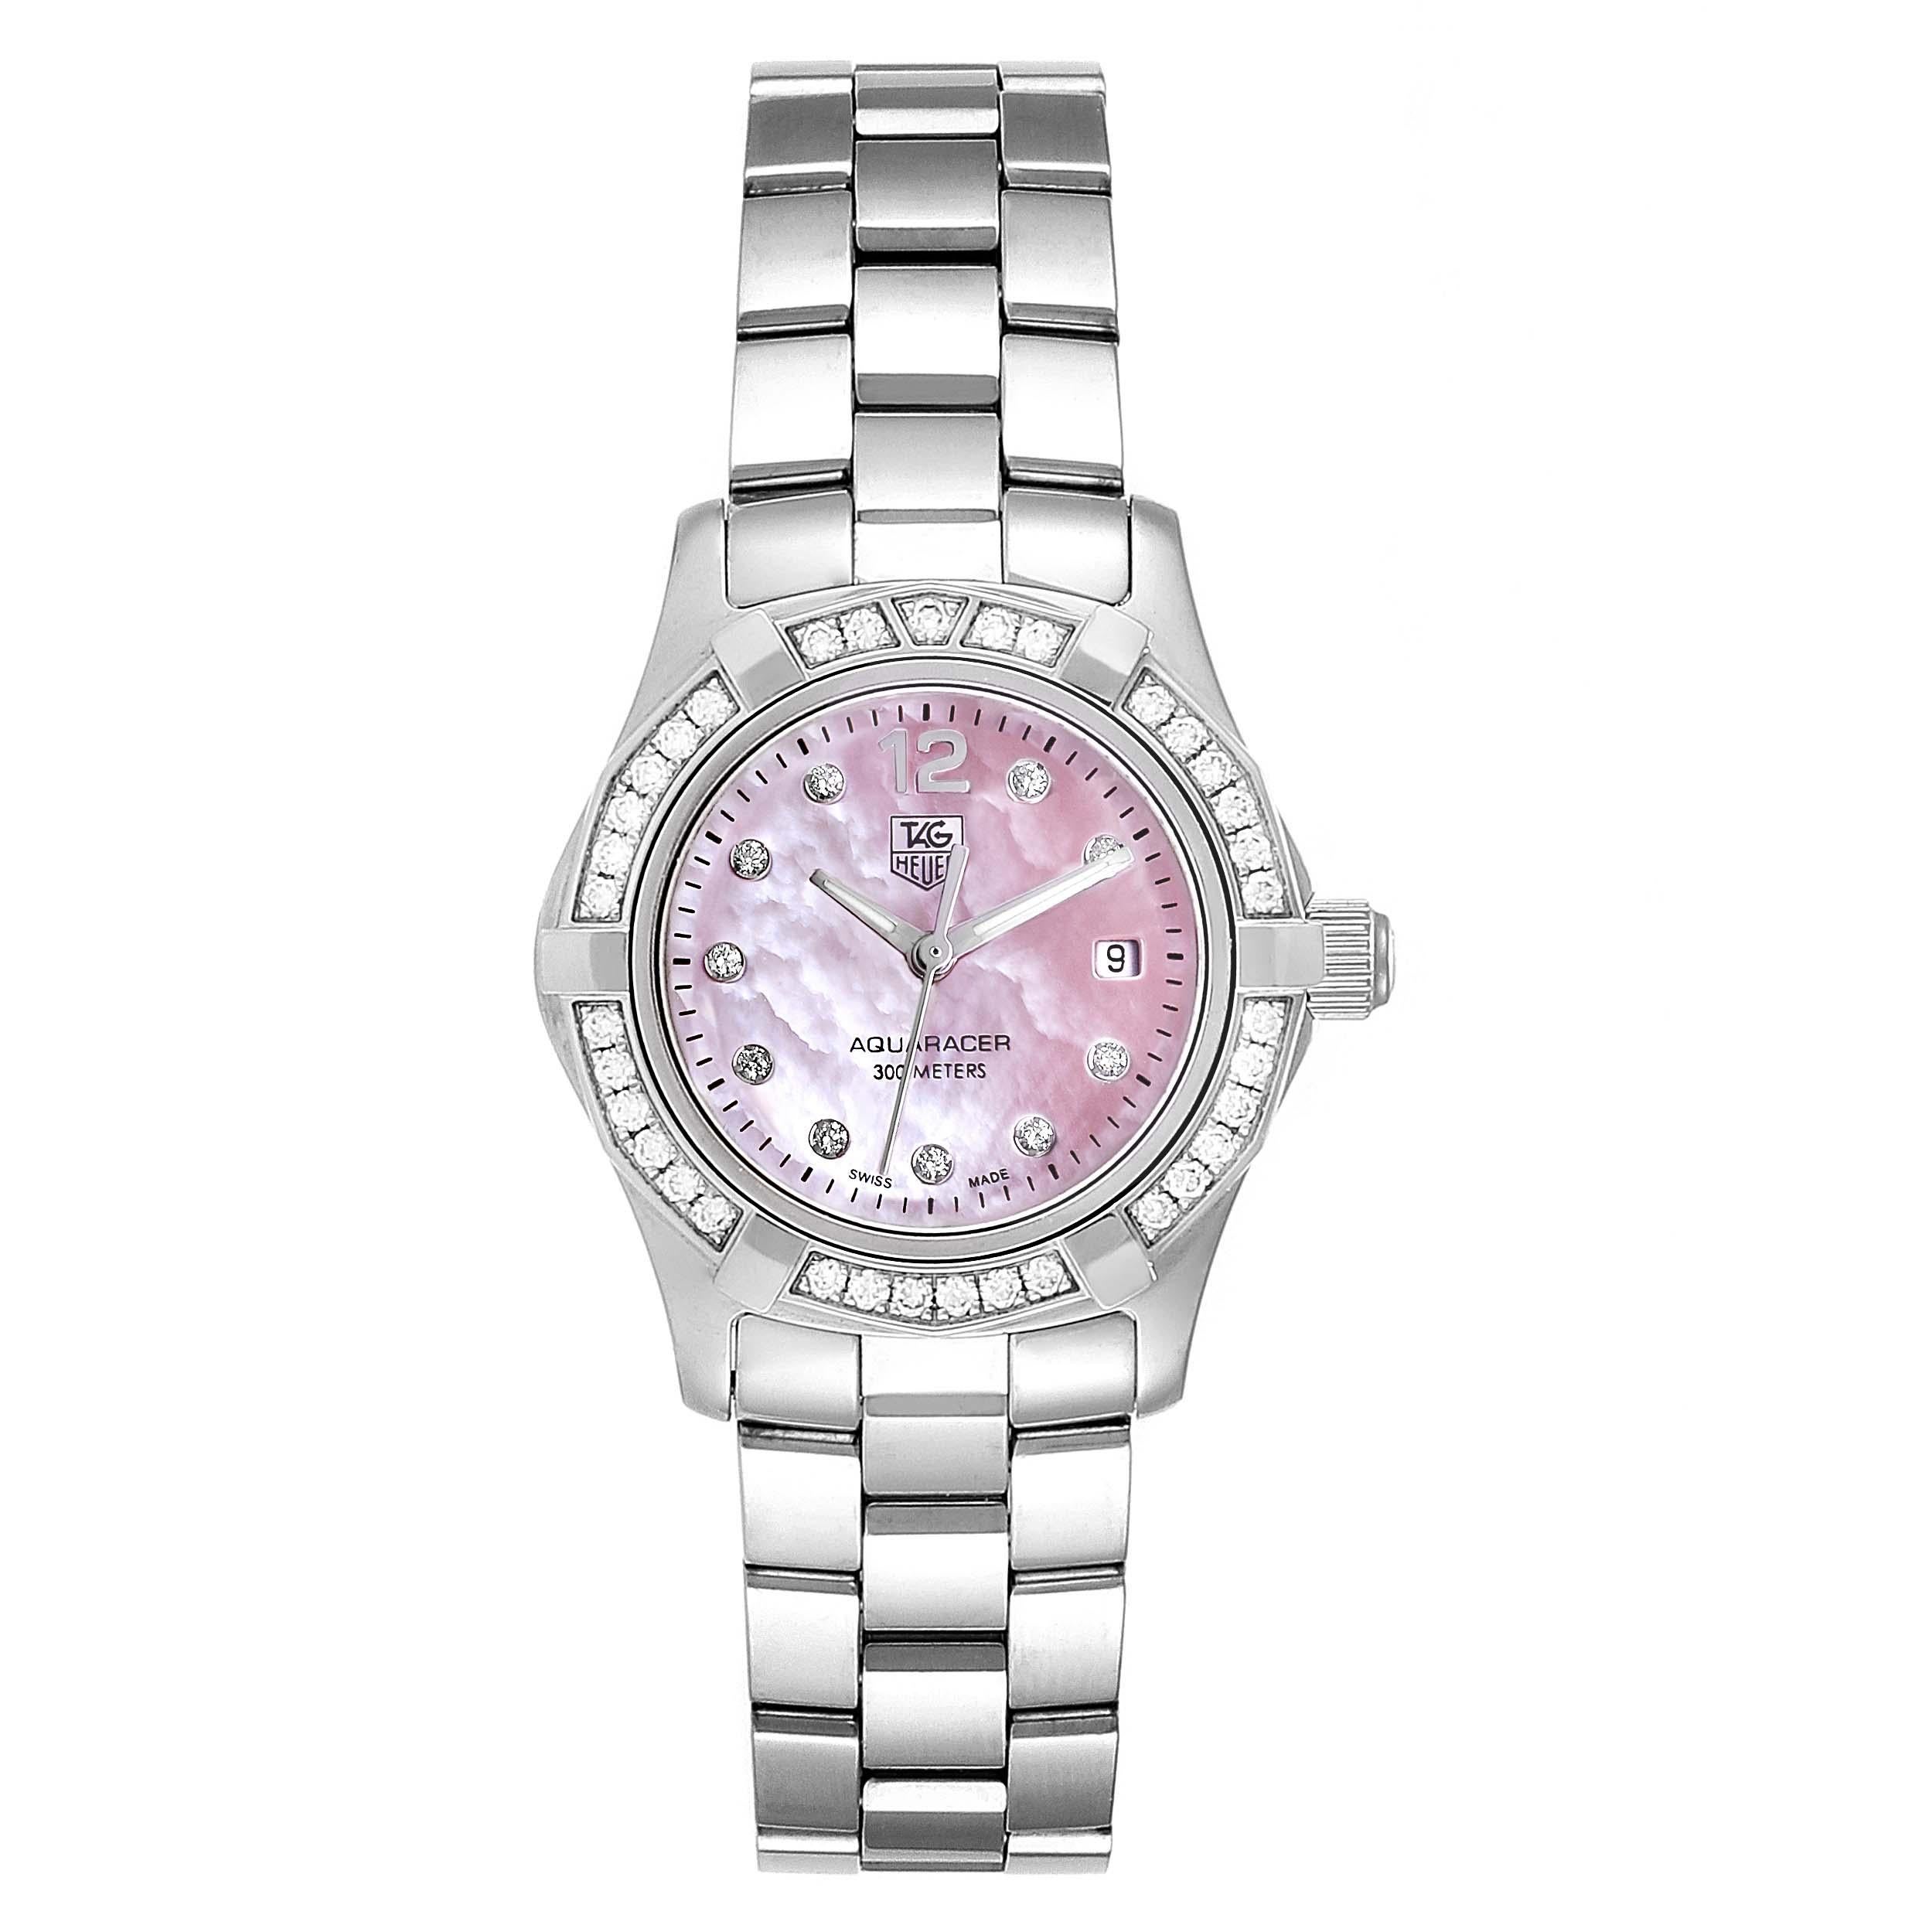 TAG Heuer Aquaracer Mother of Pearl Diamond Ladies Watch WAF141B. Quartz movement. Stainless steel and 18K yellow gold case 27.0 mm in diameter. Unidirectional rotating diamond bezel. Scratch resistant sapphire crystal. Pink Mother of Pearl dial